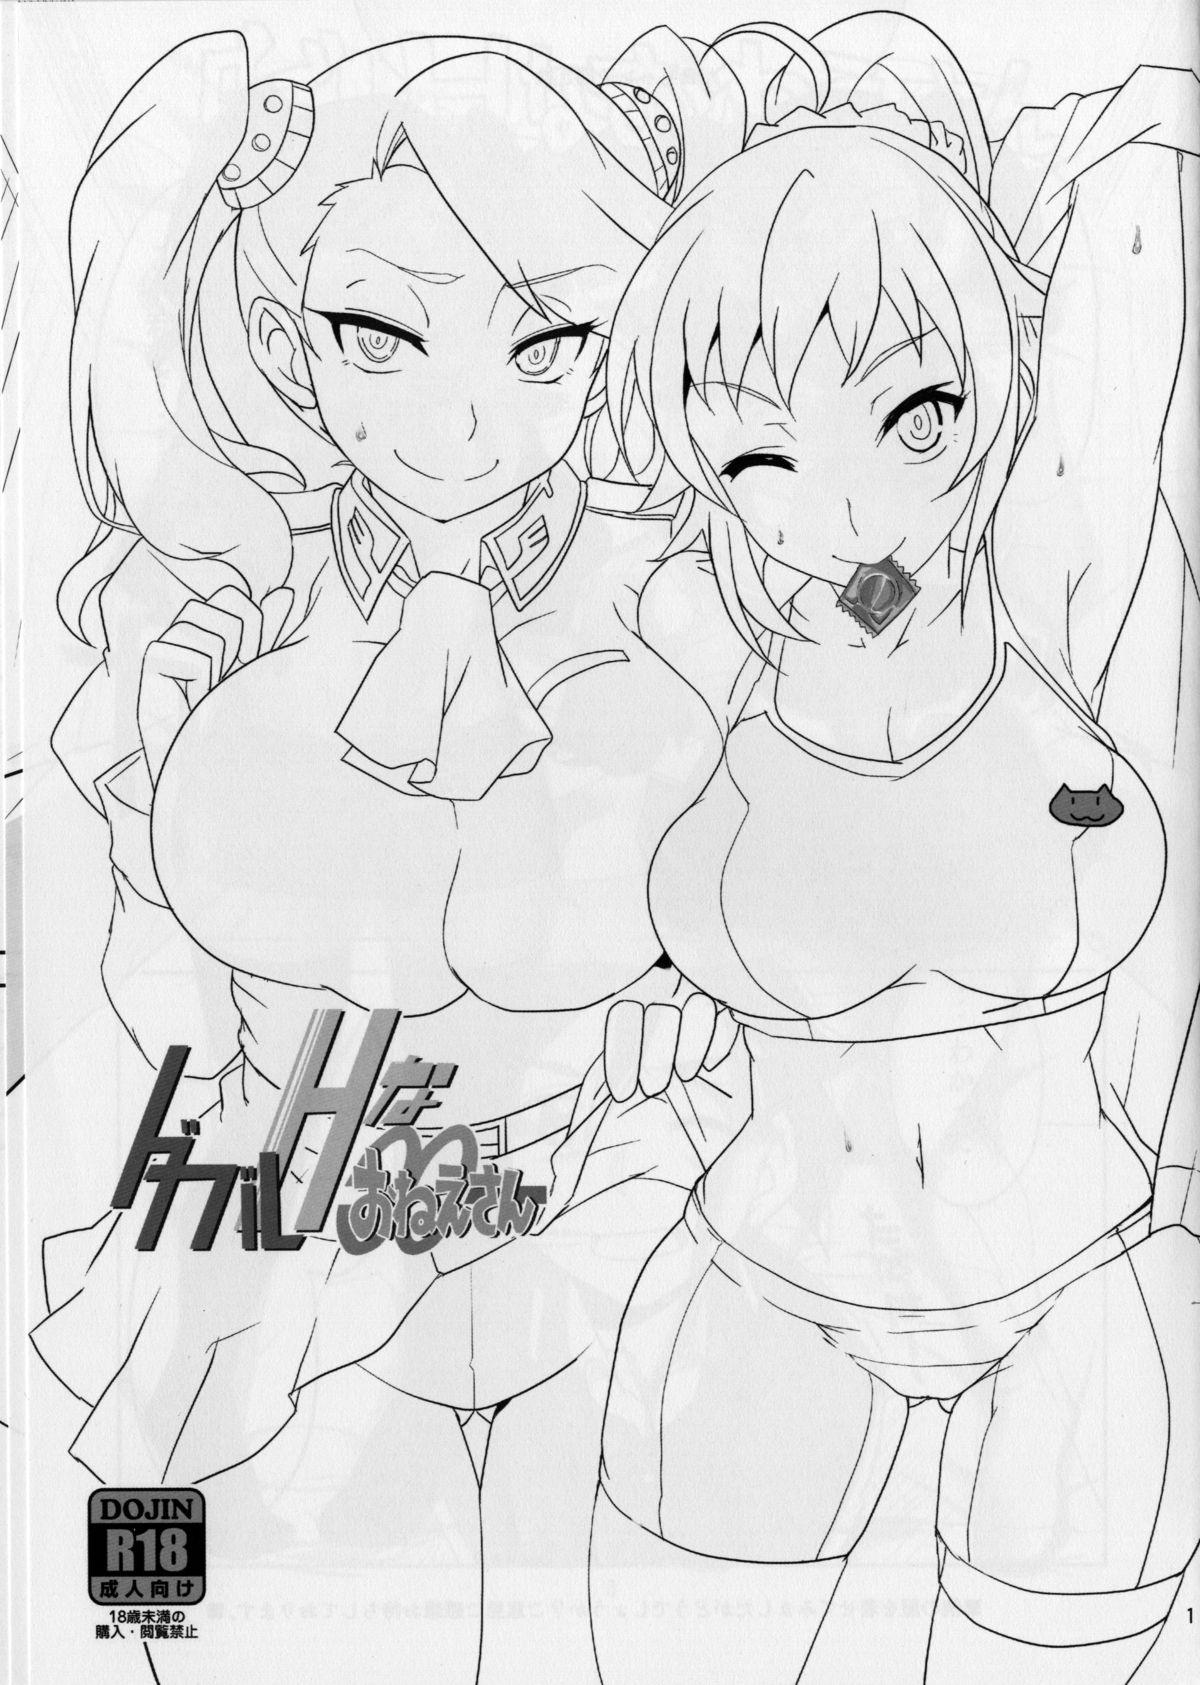 Off Double H na Onee-san - Gundam build fighters try Licking - Page 3